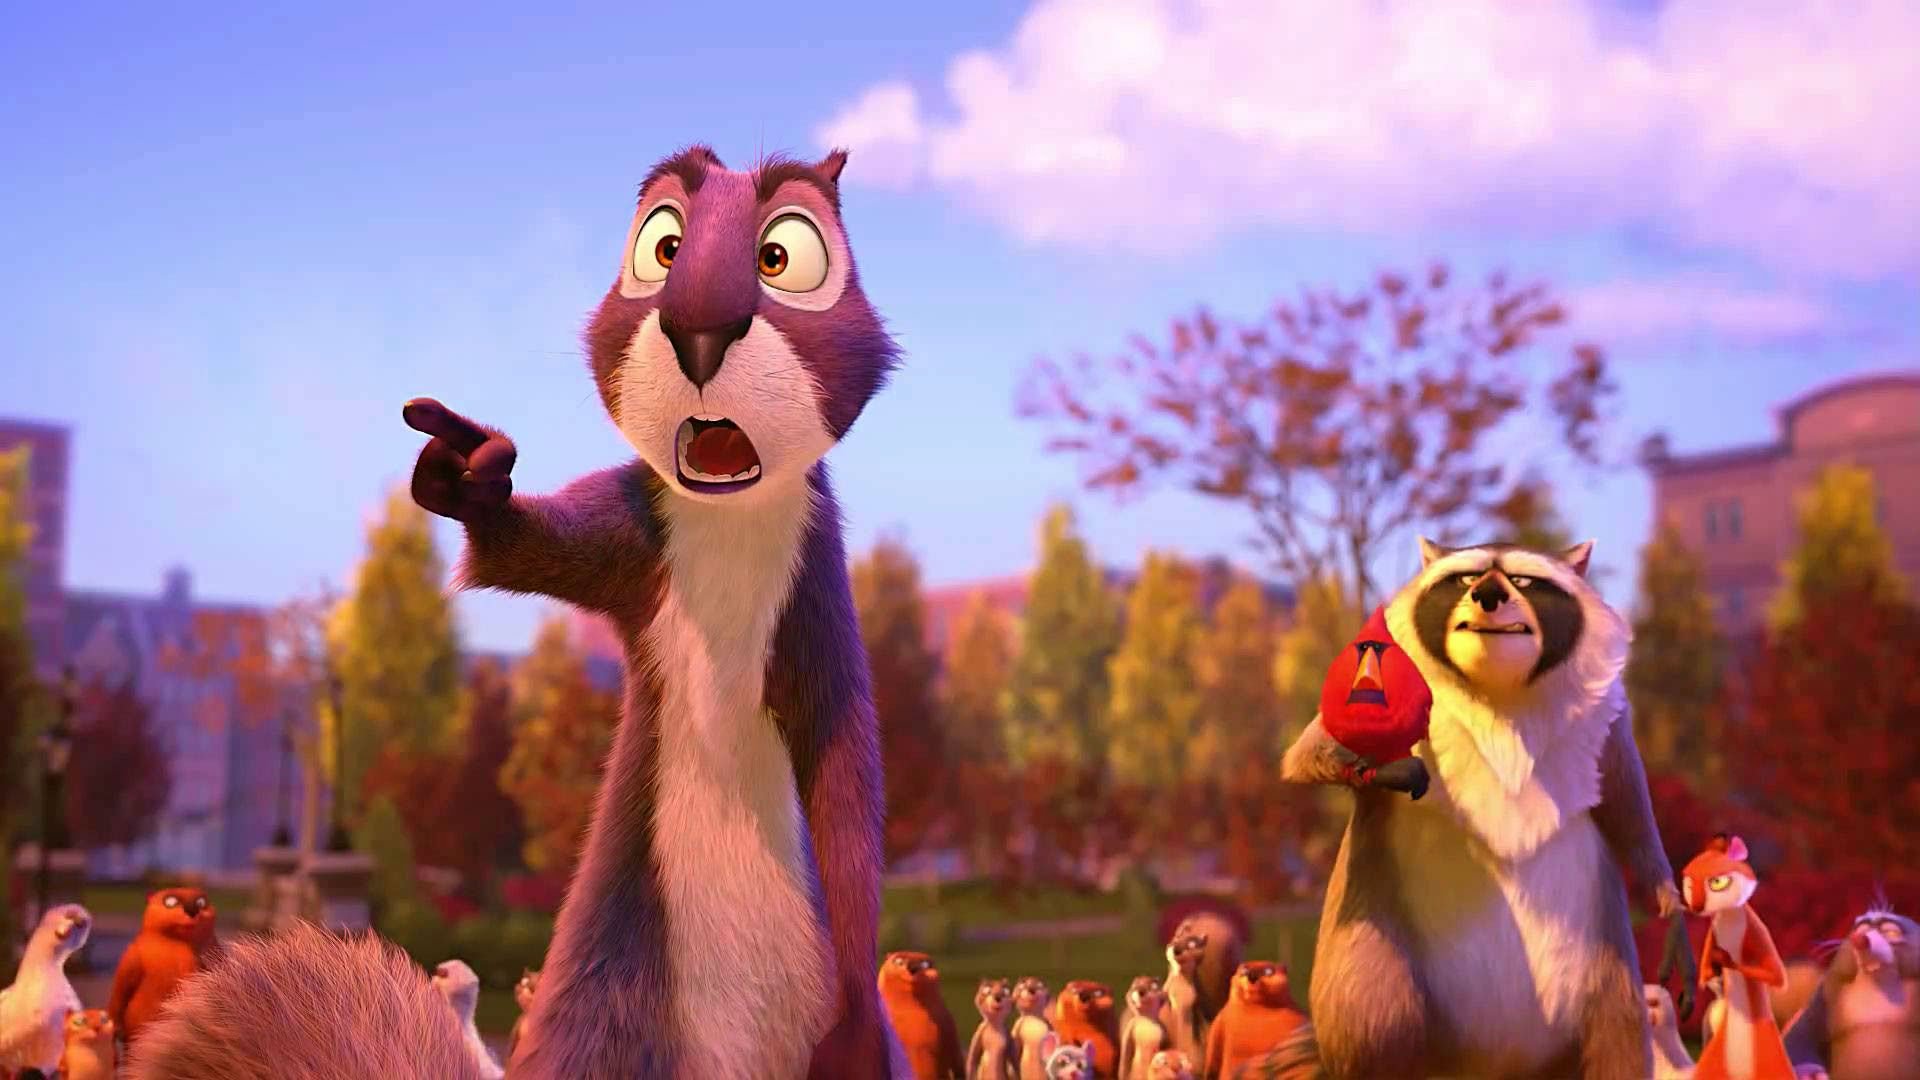 nut job, Animation, Squirrel, Comedy, Family, Nut, Job Wallpapers HD ...